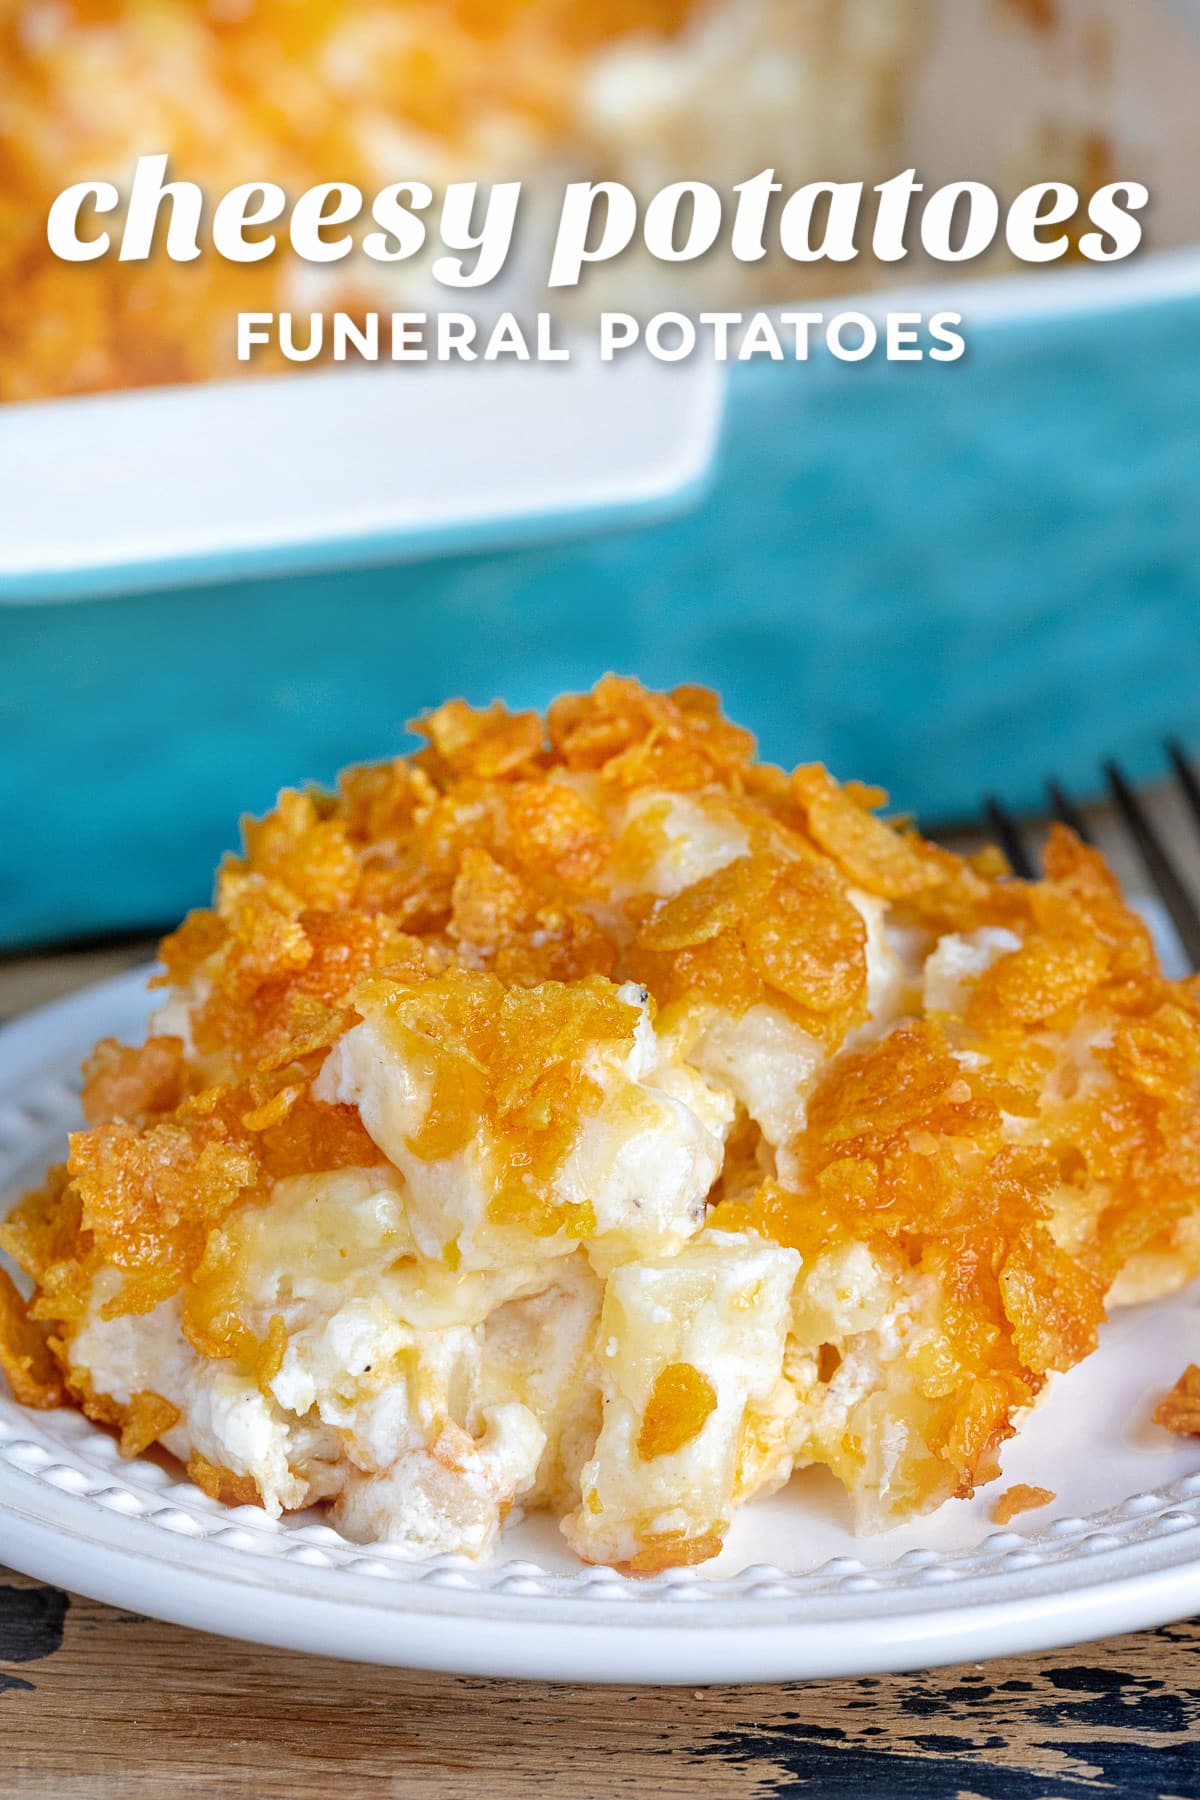 cheesy potatoes on a white plate with casserole dish in background and title overlay at top